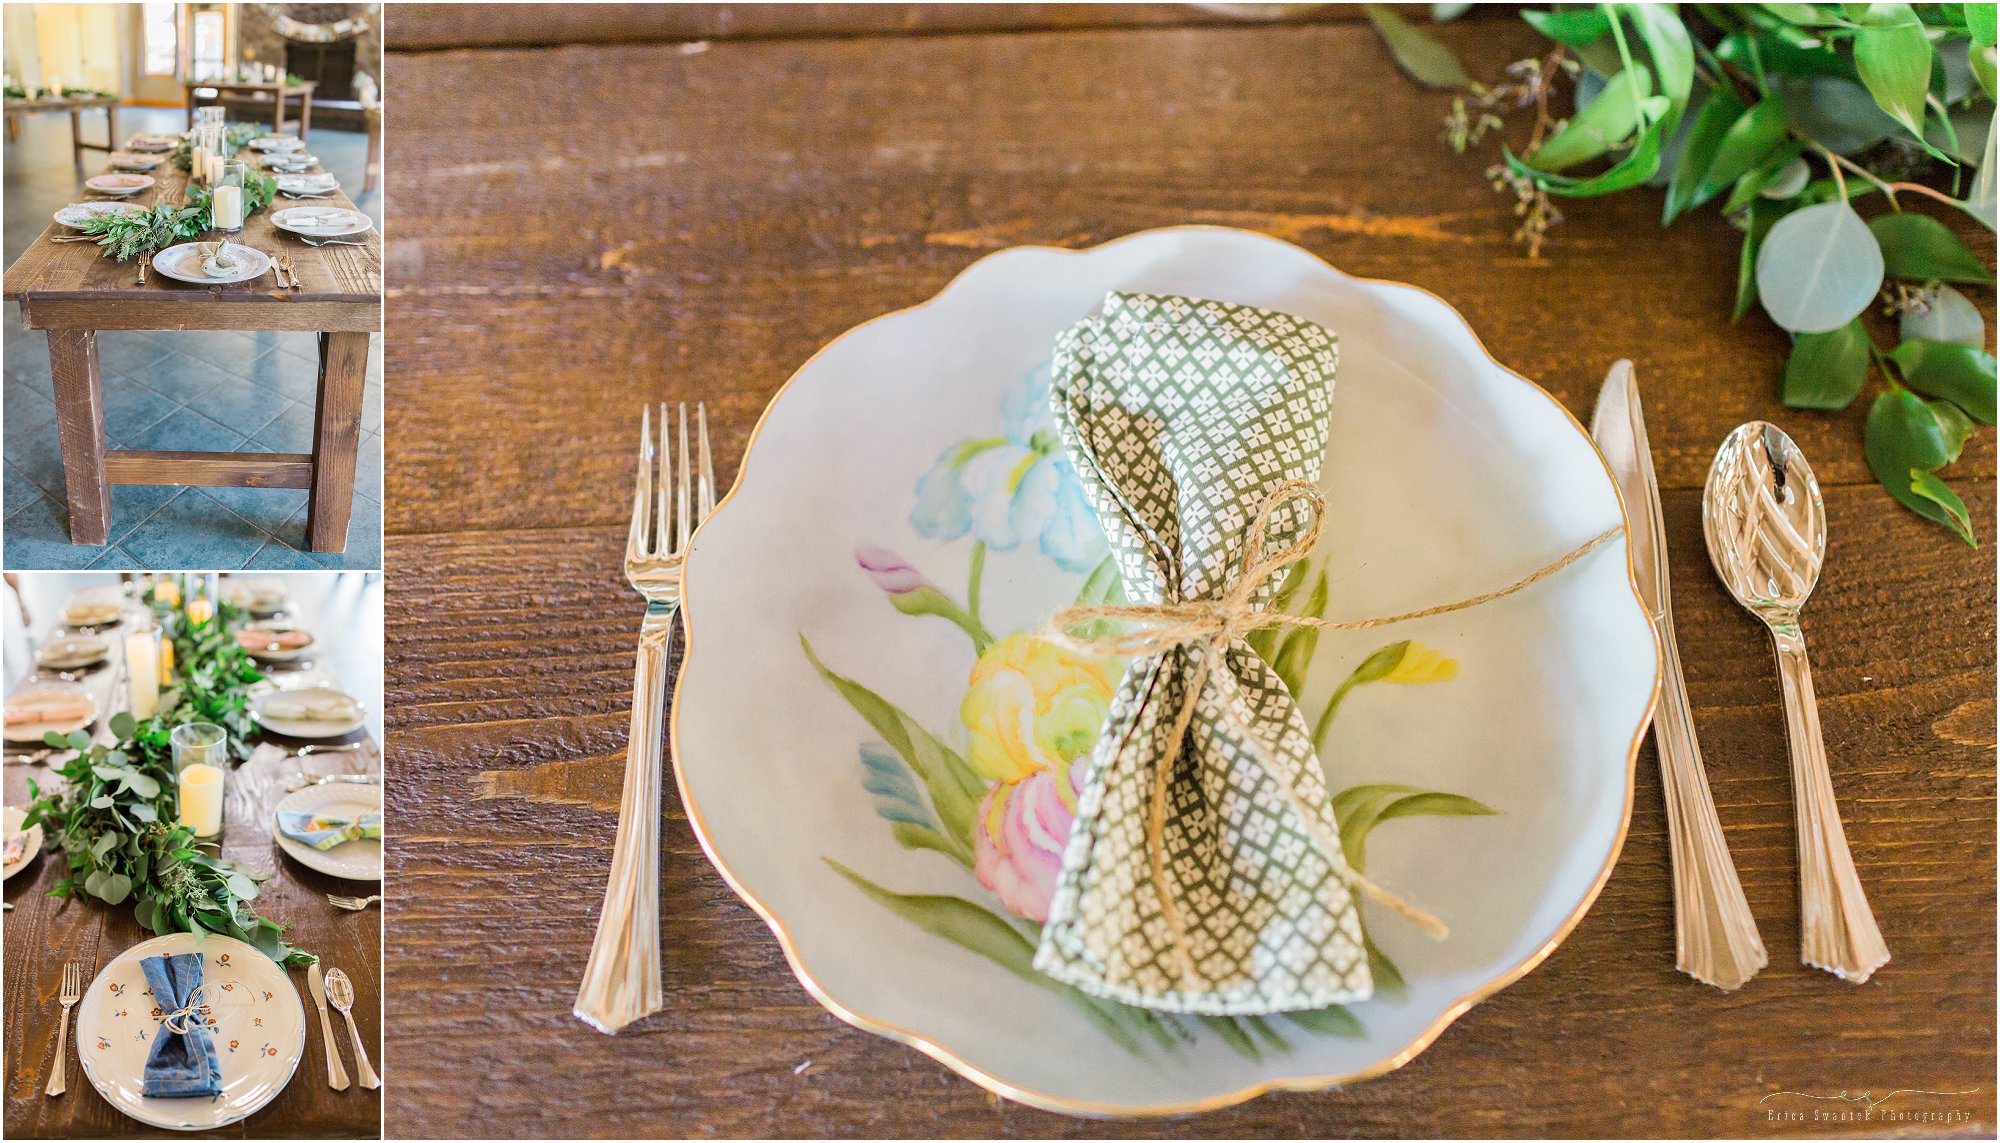 Farmhouse tables provide the rustic feel, while the china and linens lend to the vintage look at Aspen Hall in Bend, Oregon. | Erica Swantek Photography